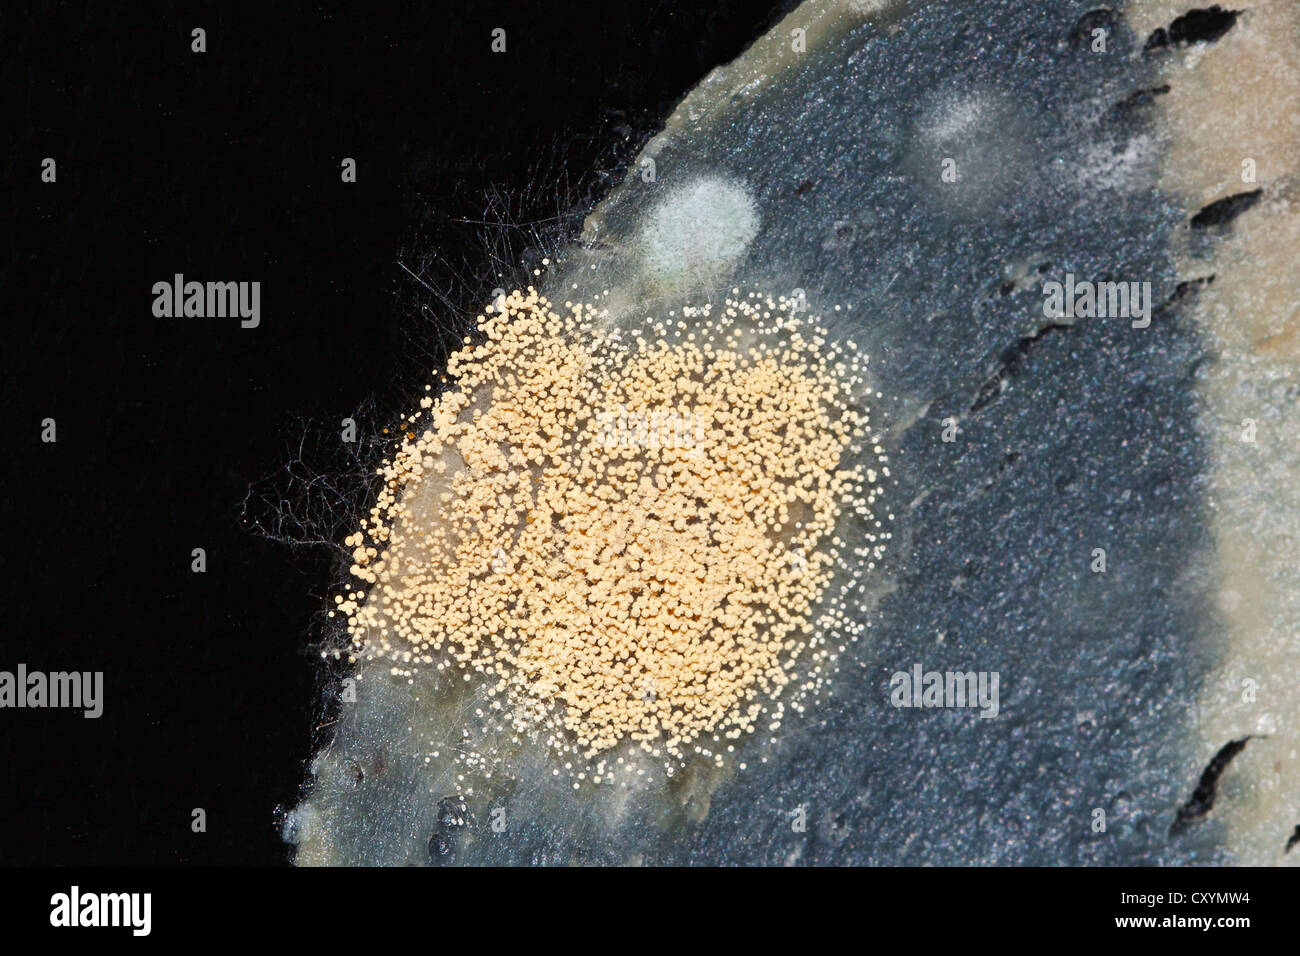 Mould, spores, mould culture, on sausage Stock Photo